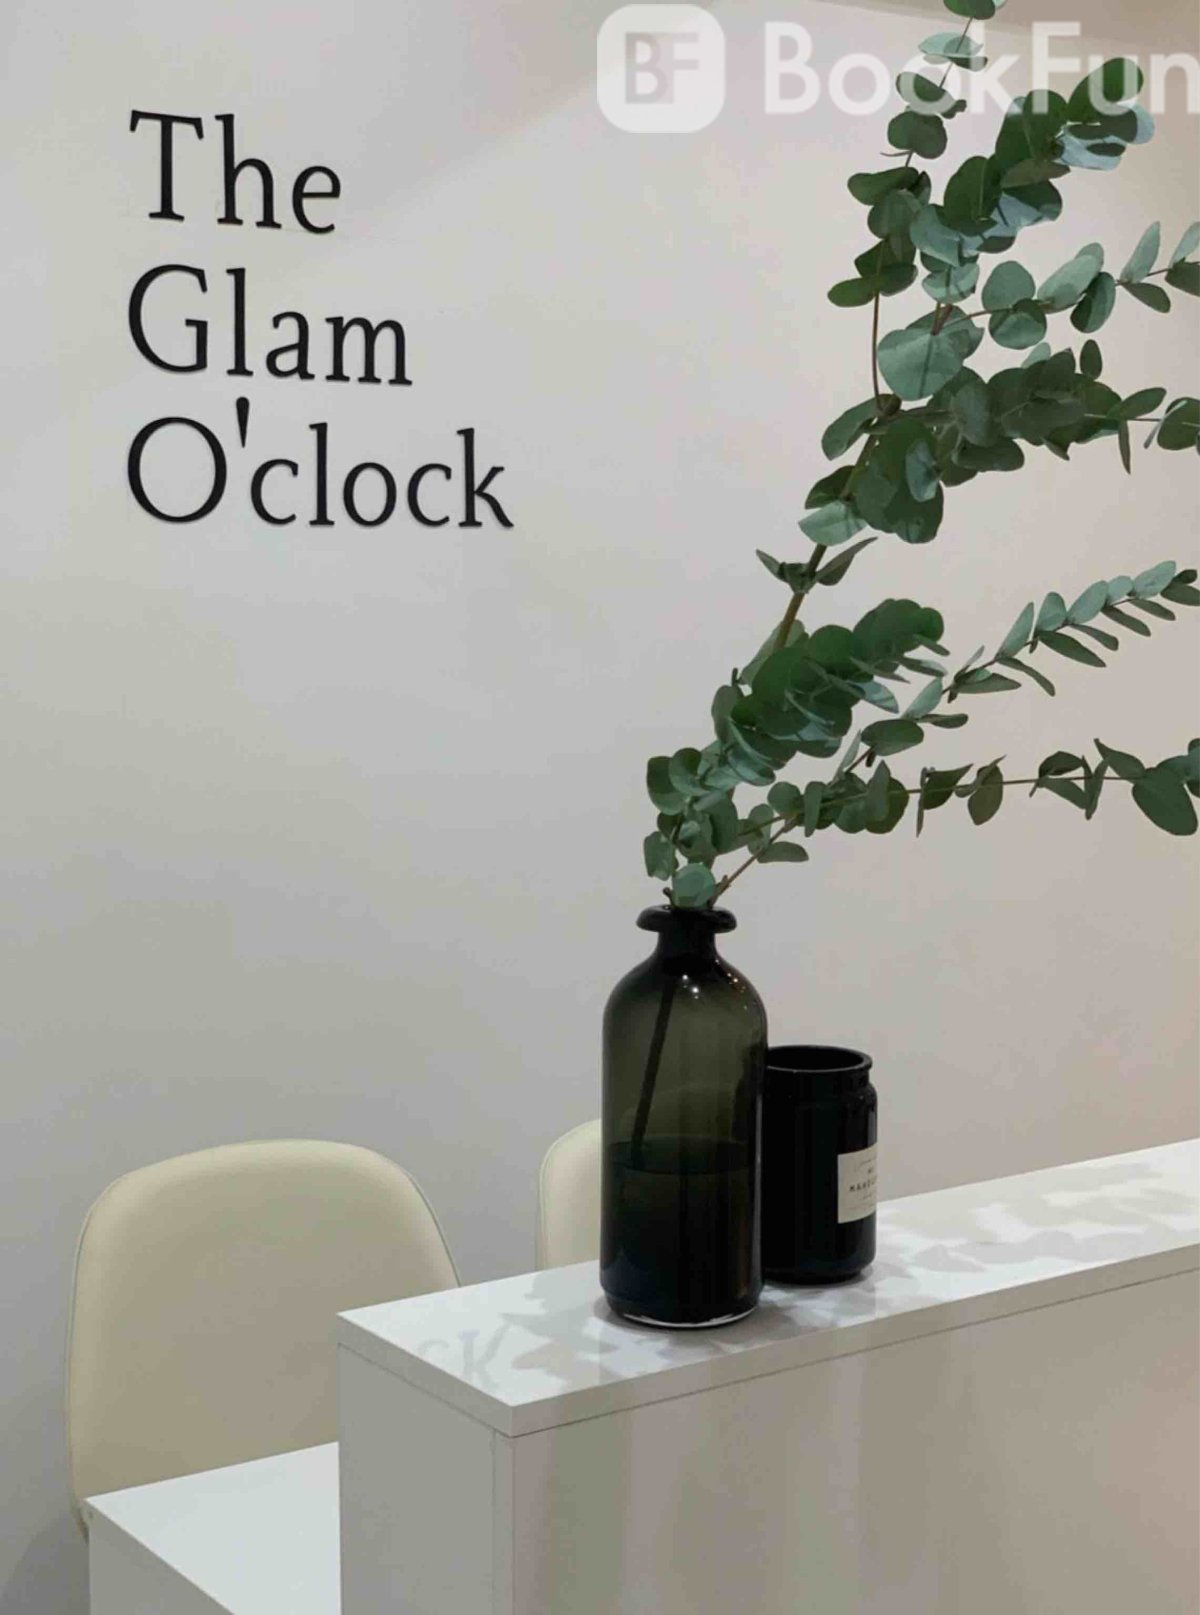 The Glam O'clock offers Nails, Lashes, Waxing

and Makeup services. Seek your beauty within at

this oasis in the city.